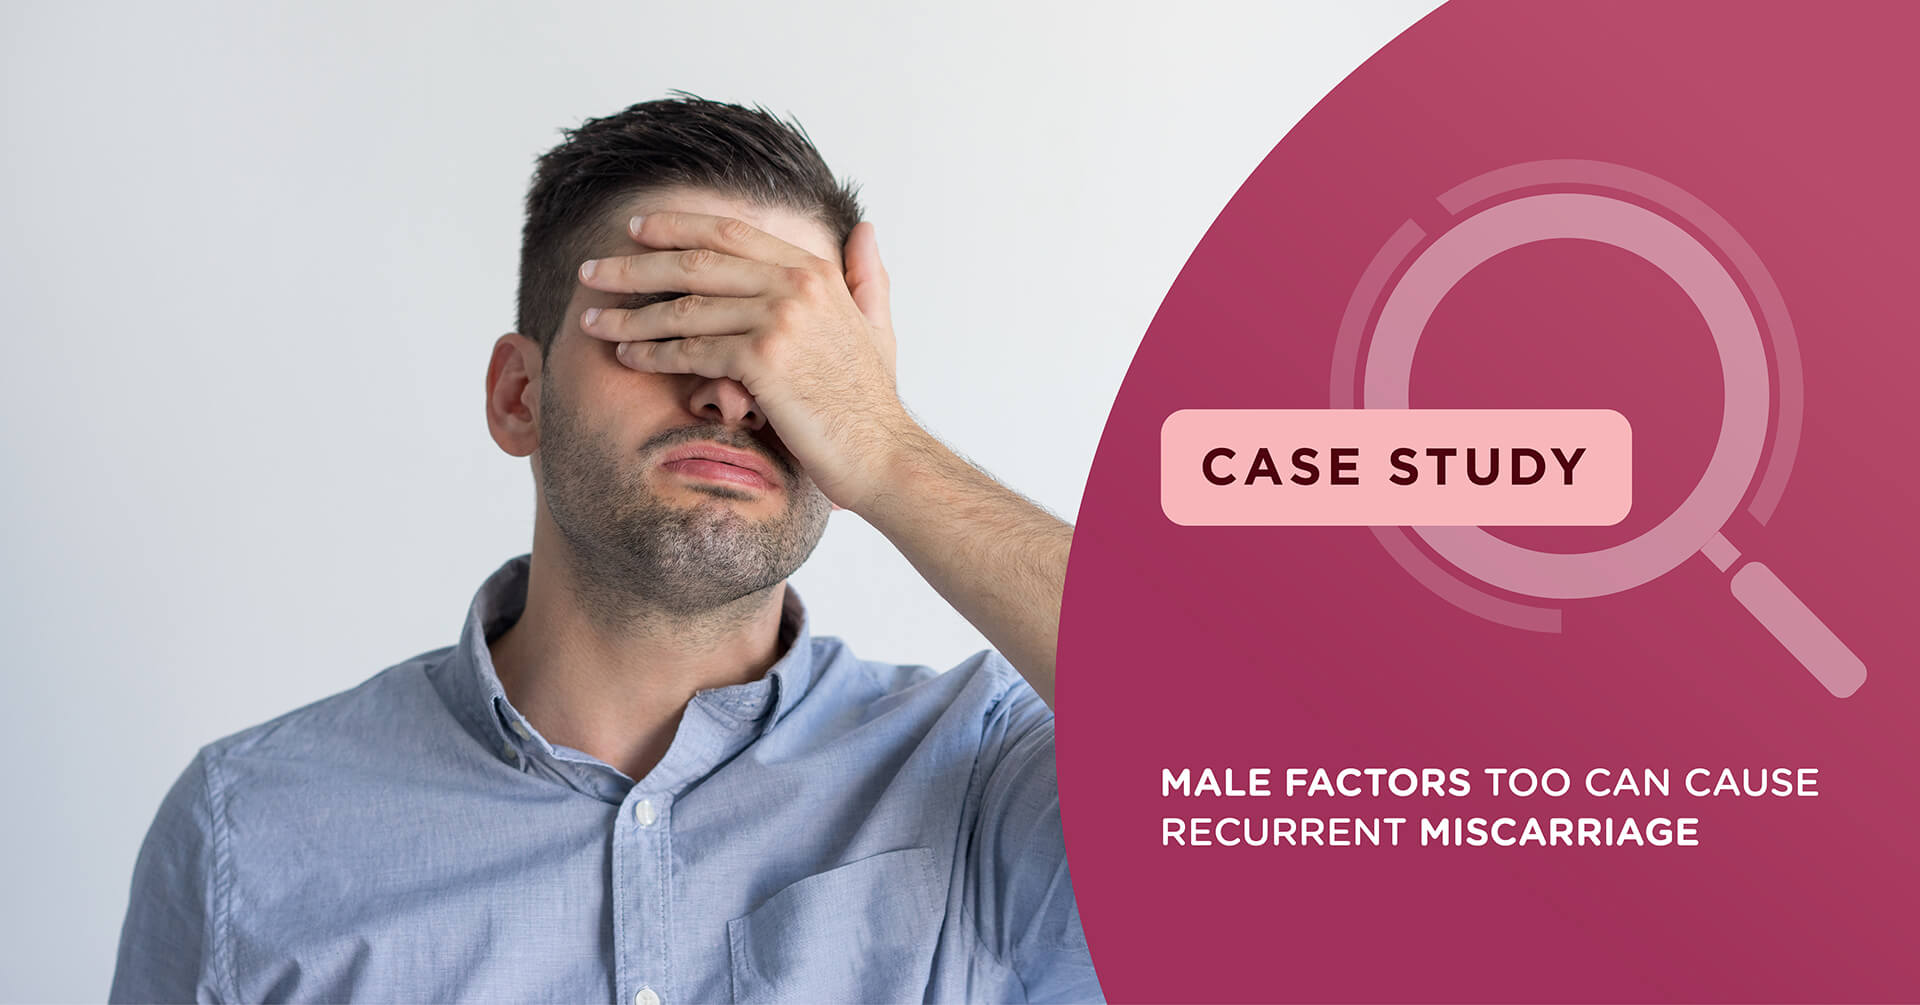 Male factors too can cause recurrent miscarriage